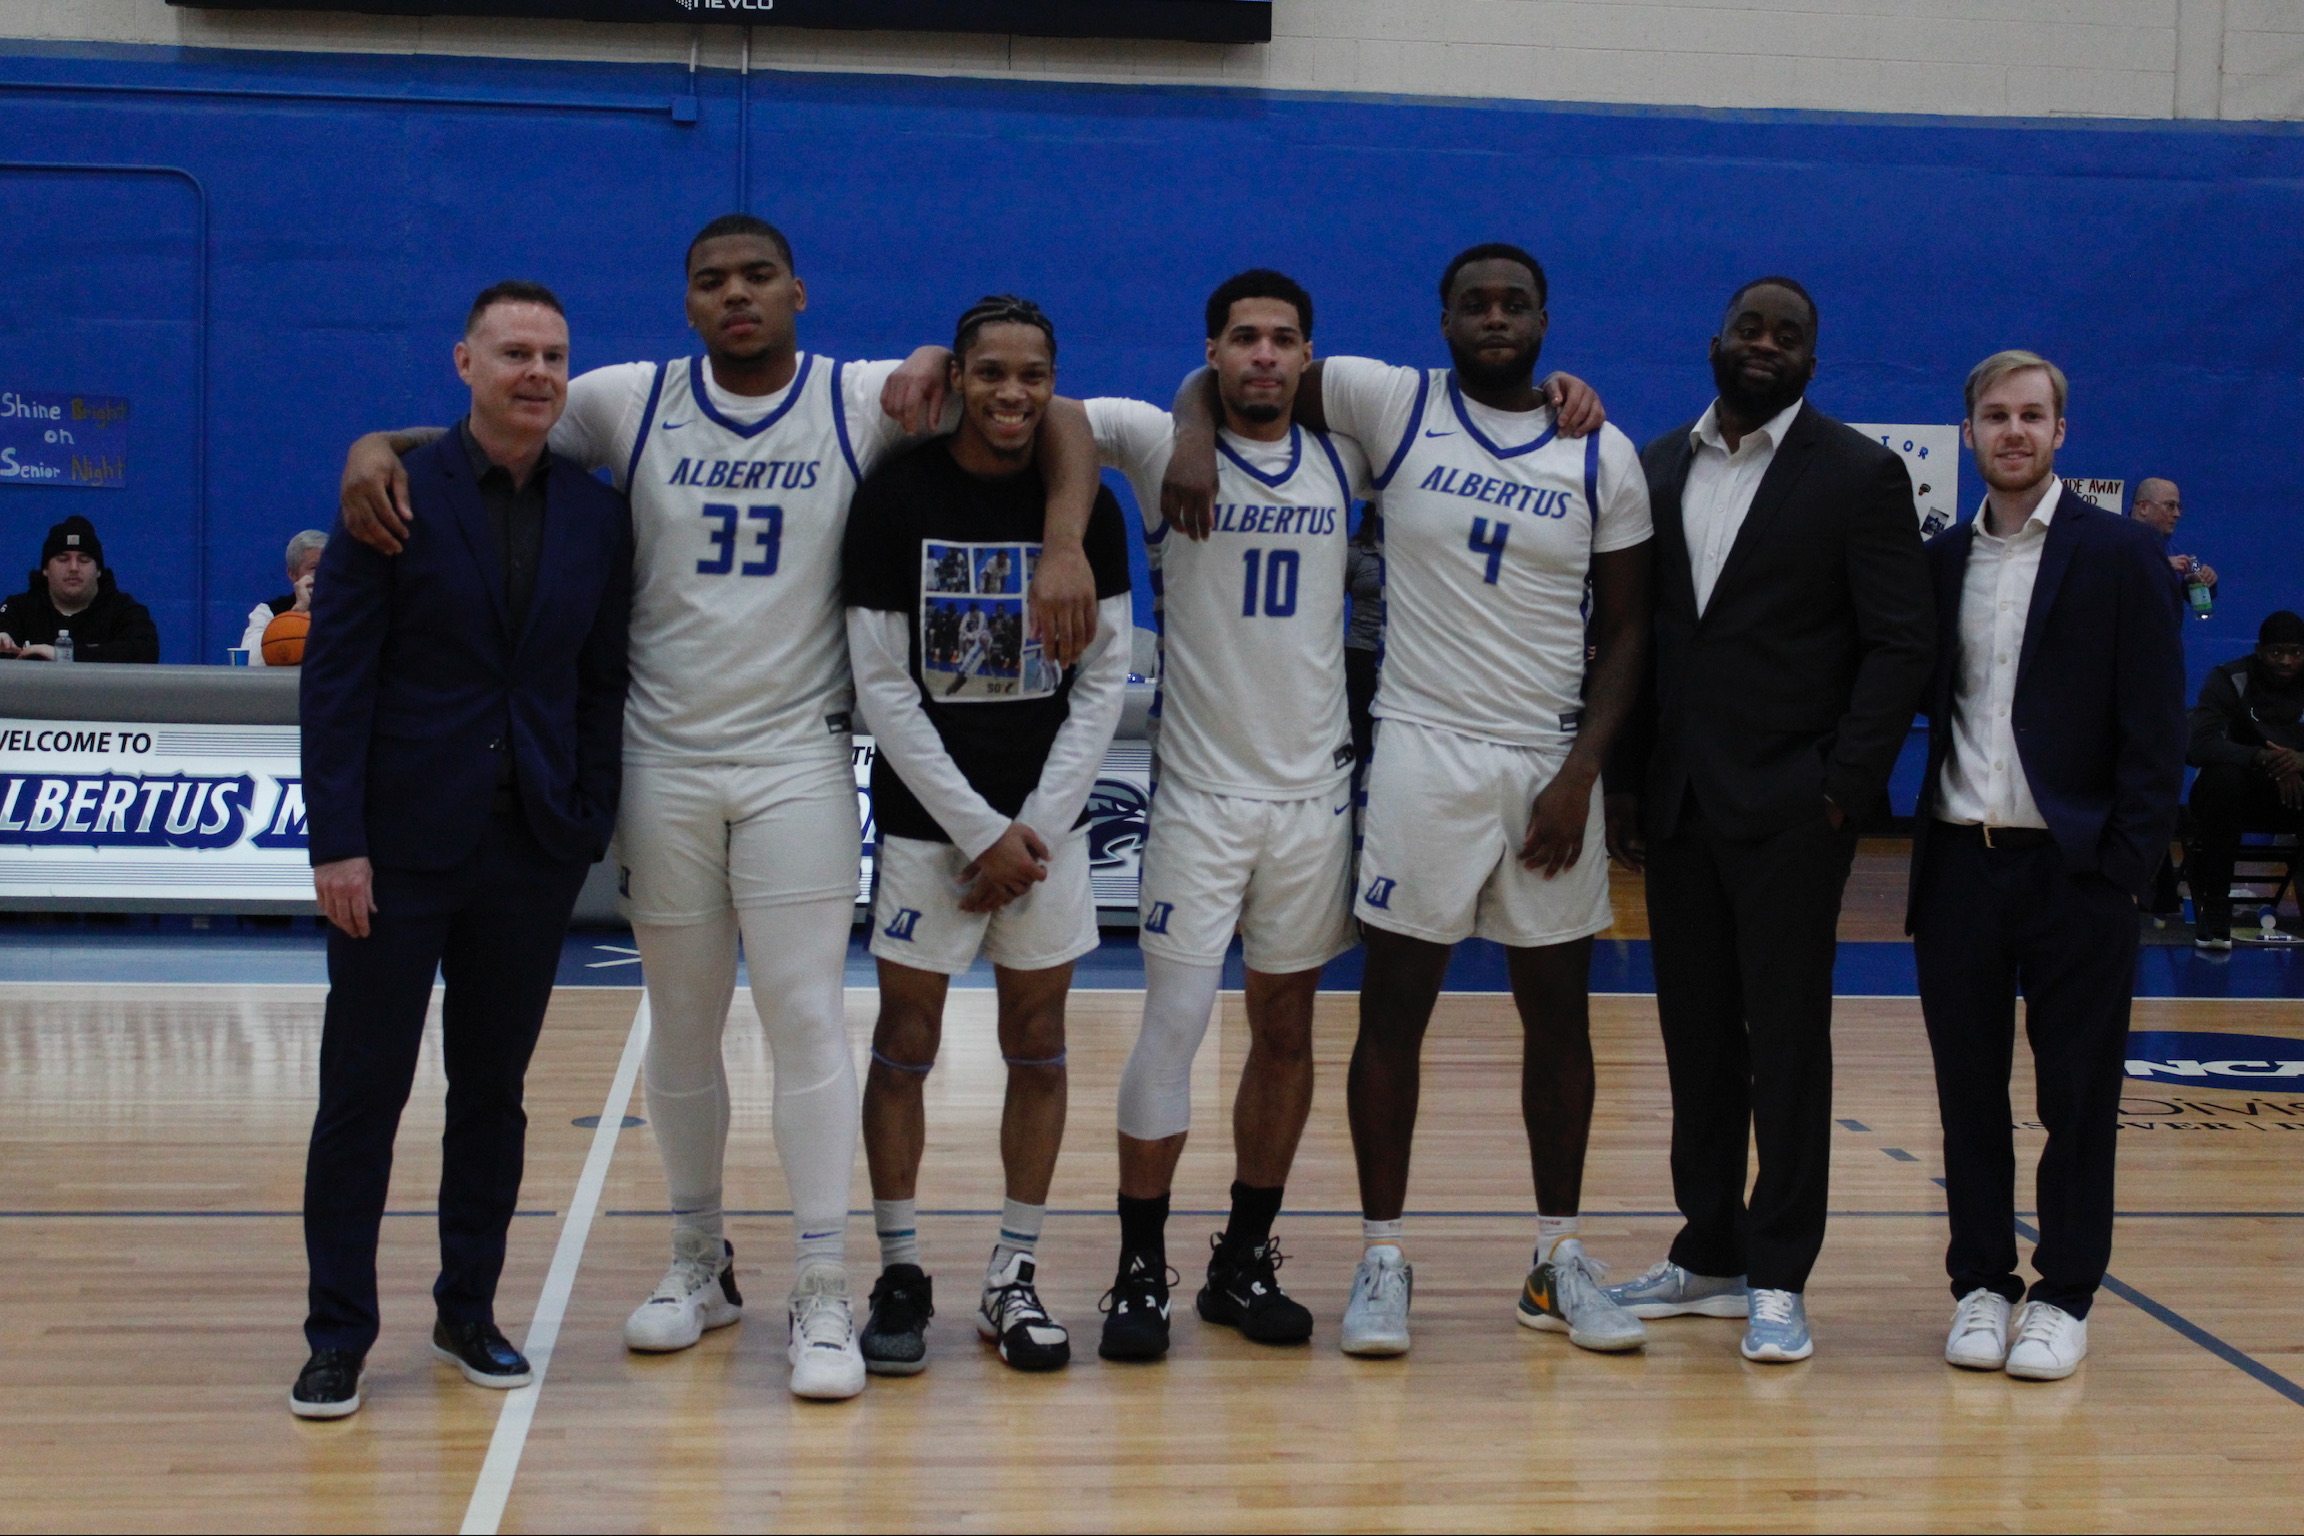 Washington Scores 1,000th Point On Senior Day As Men's Basketball Routs New England College In Regular Season Finale